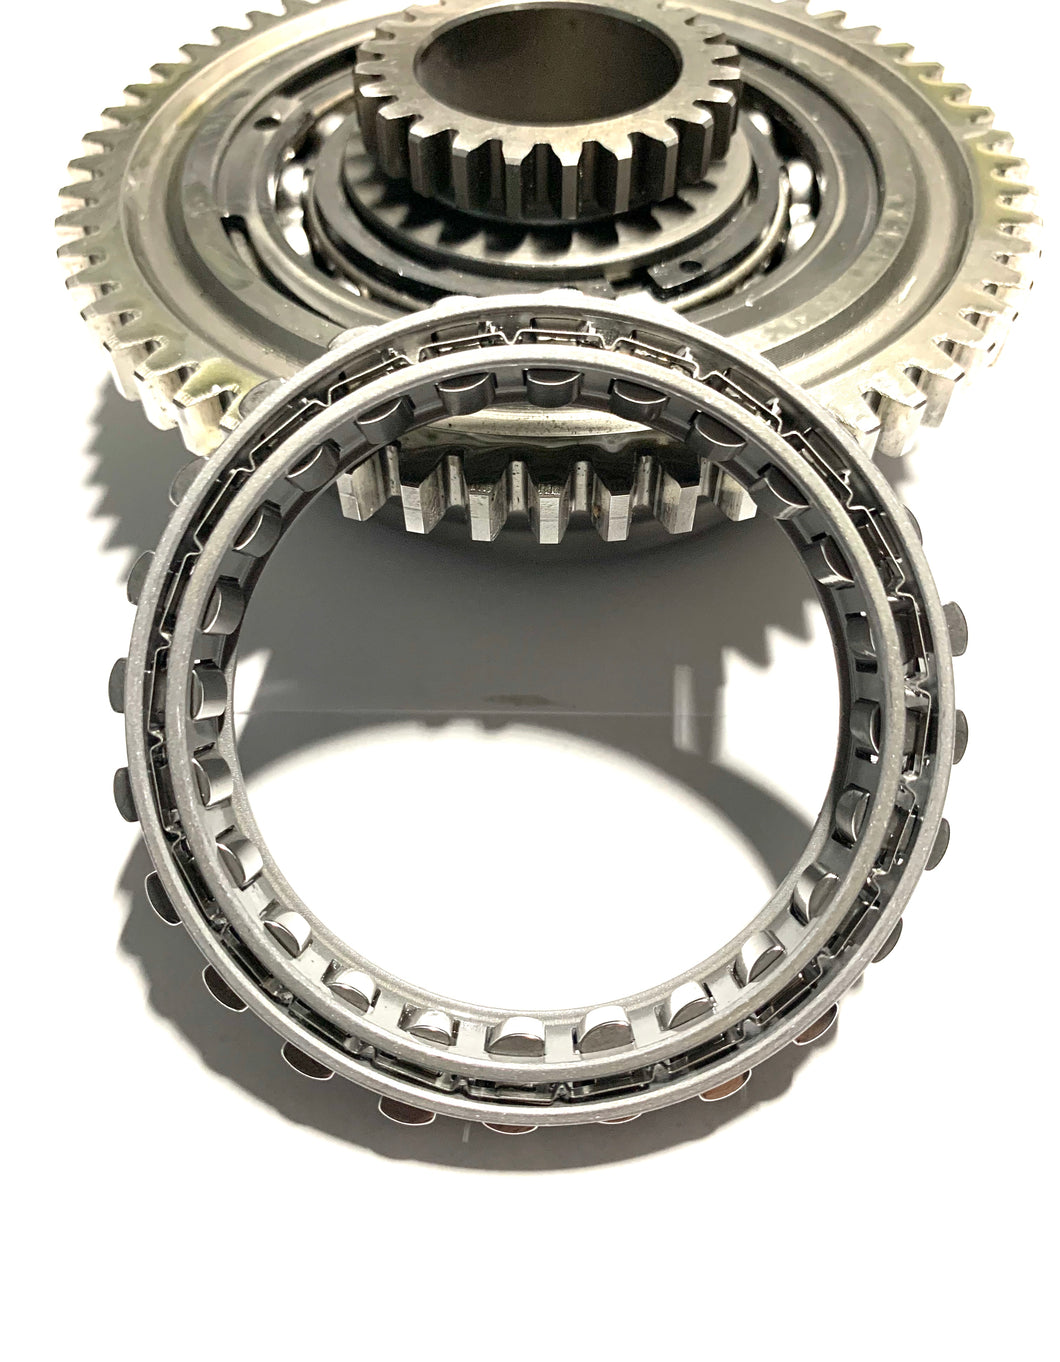 ONE WAY CLUTCH BEARING REPLACEMENT YAMAHA 1.8 SVHO